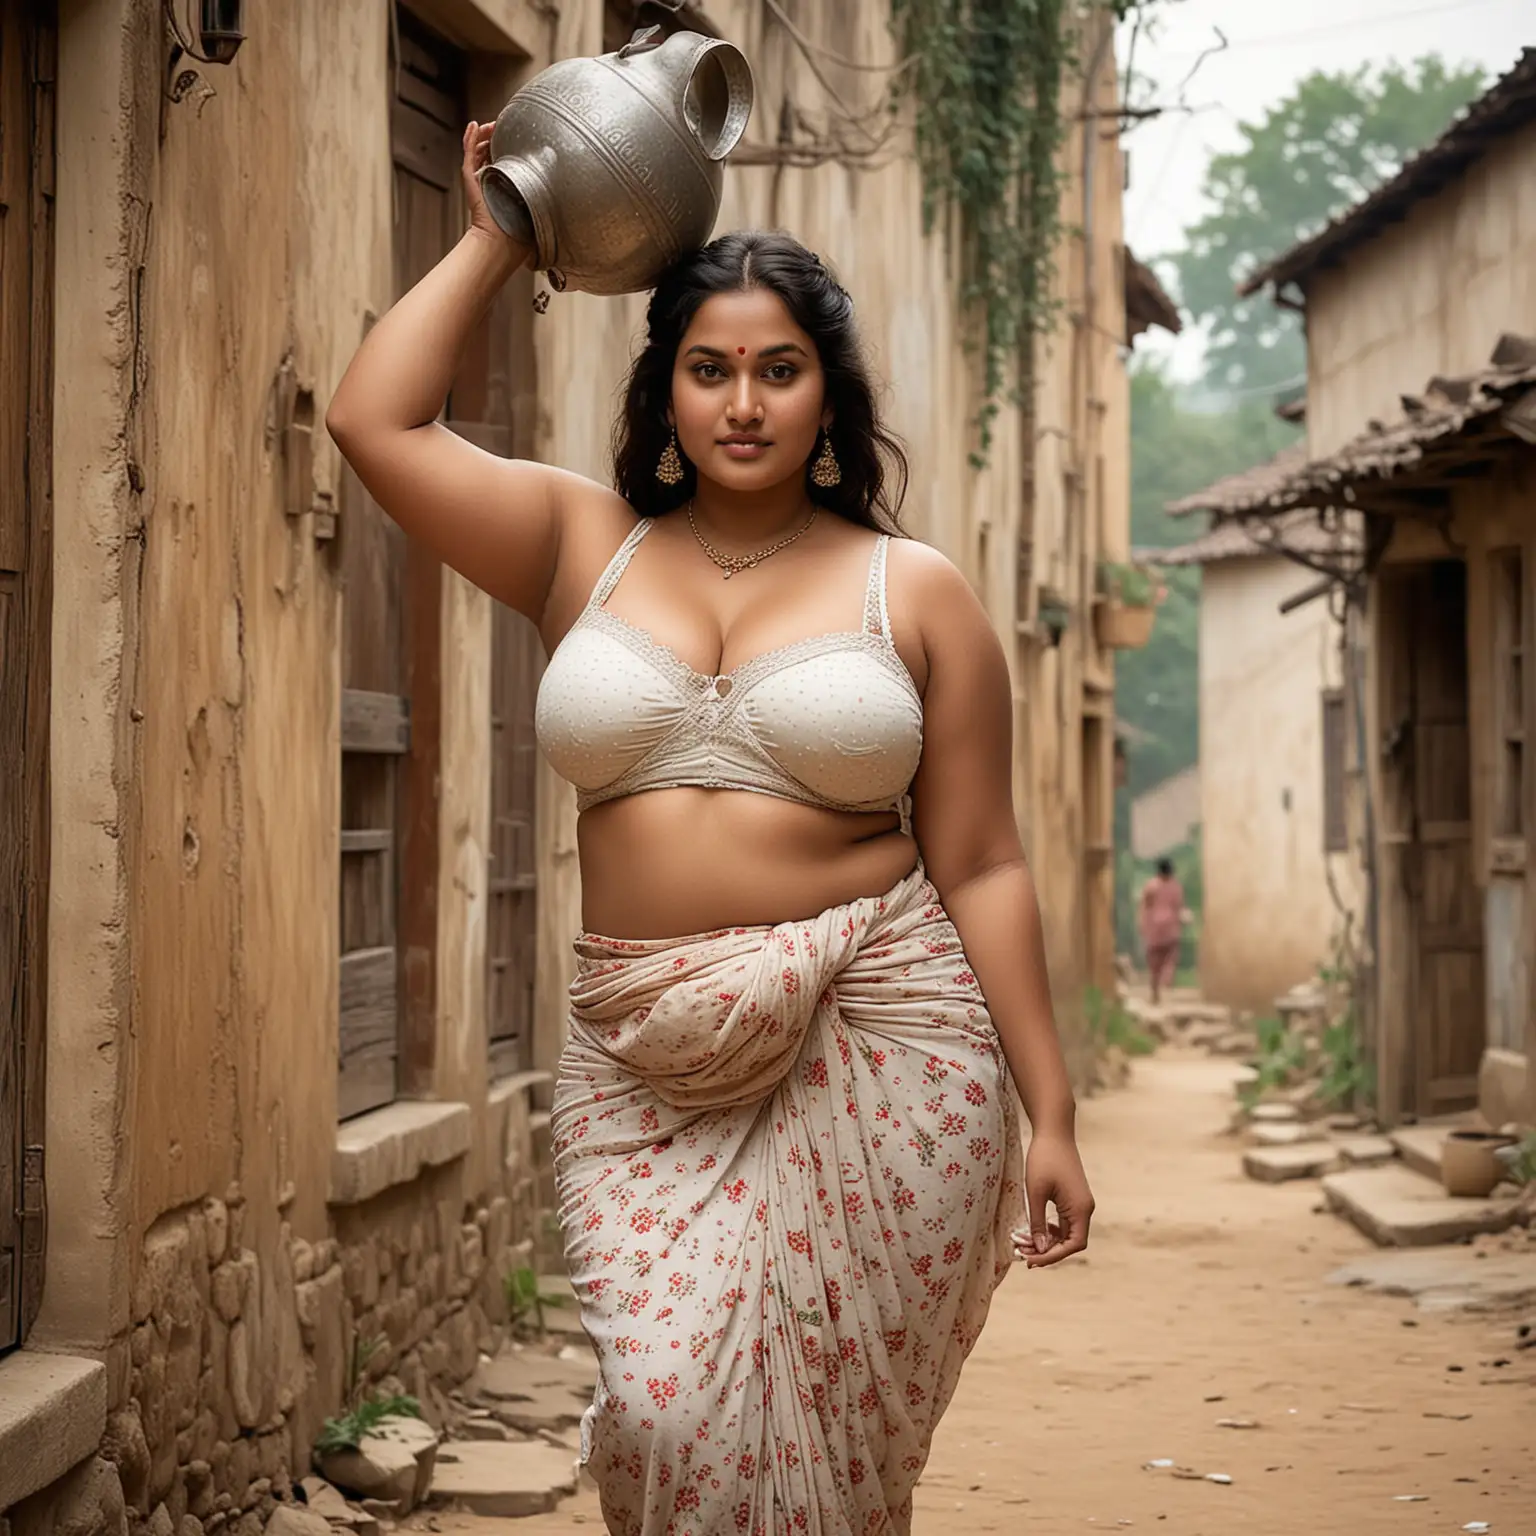 Visualize a seductive BBW woman, her curves accentuated by the embrace of an old Indian undergarment, as she navigates the rustic charm of a village setting. With a chubby waist that sways enticingly with every step, she carries a pitcher atop her head with effortless grace. As she moves through the quaint streets, the allure of her voluptuous form draws the gaze of all who pass by. Despite the simplicity of her attire, there's an undeniable sensuality to her presence, a testament to the timeless beauty of the feminine form amidst the tranquil backdrop of village life.